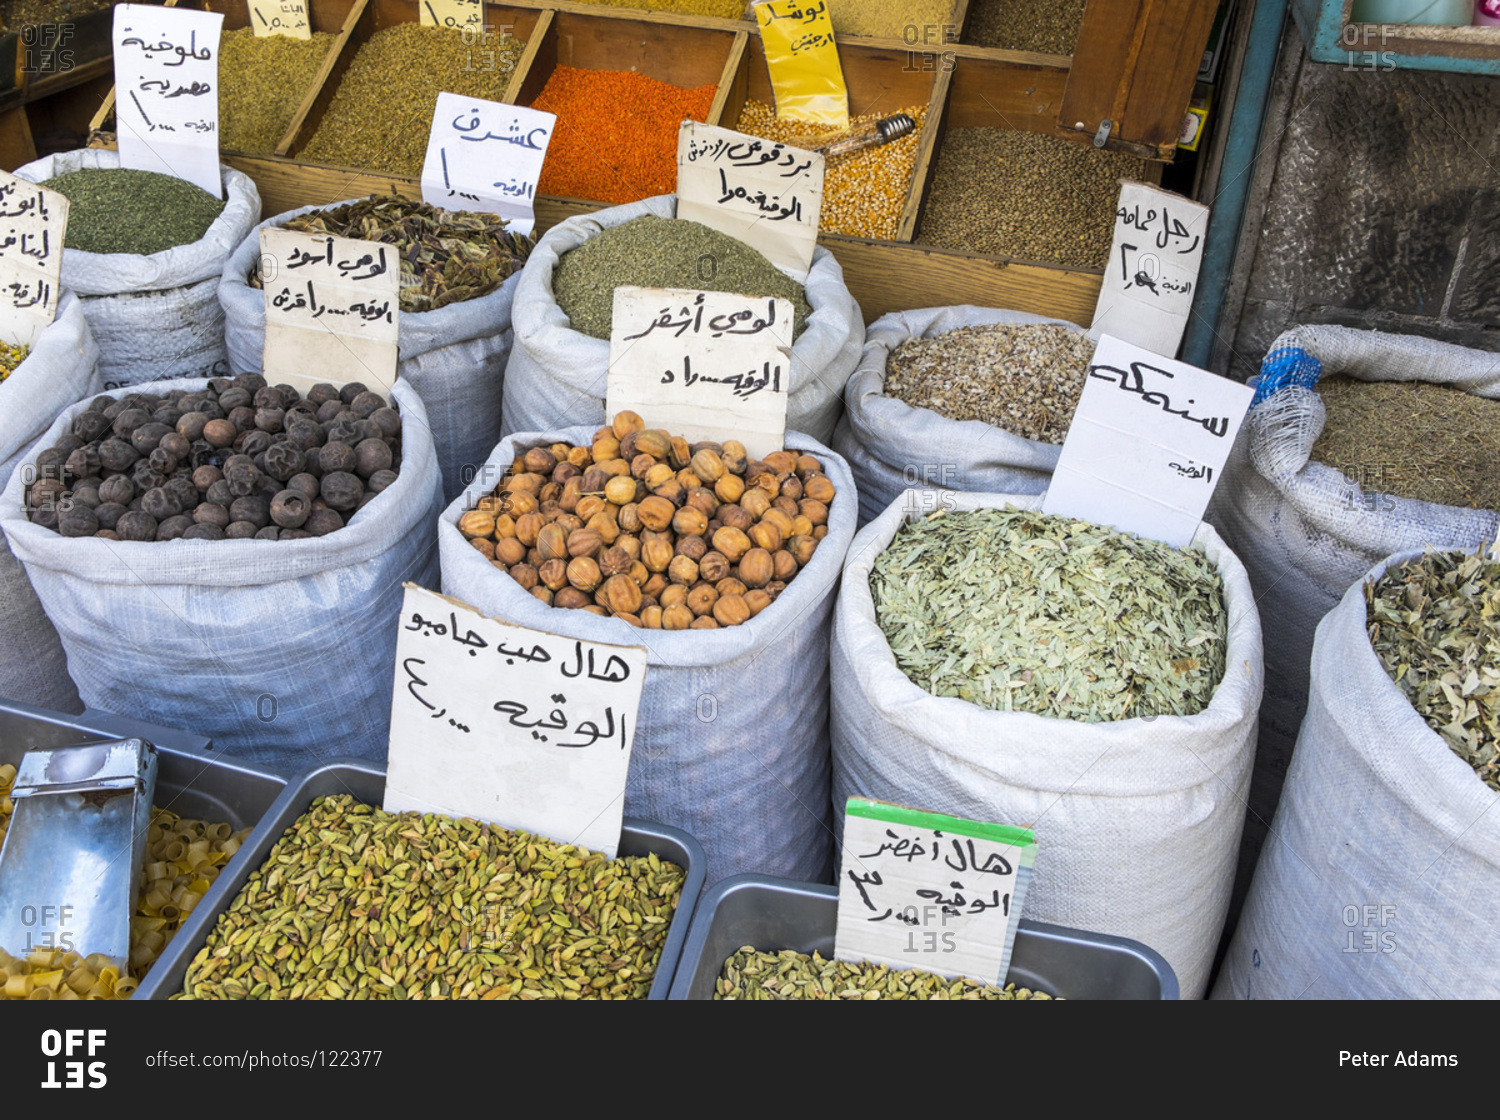 Arabic priced and labeled sacks of spices in a shop in Amman, Jordan